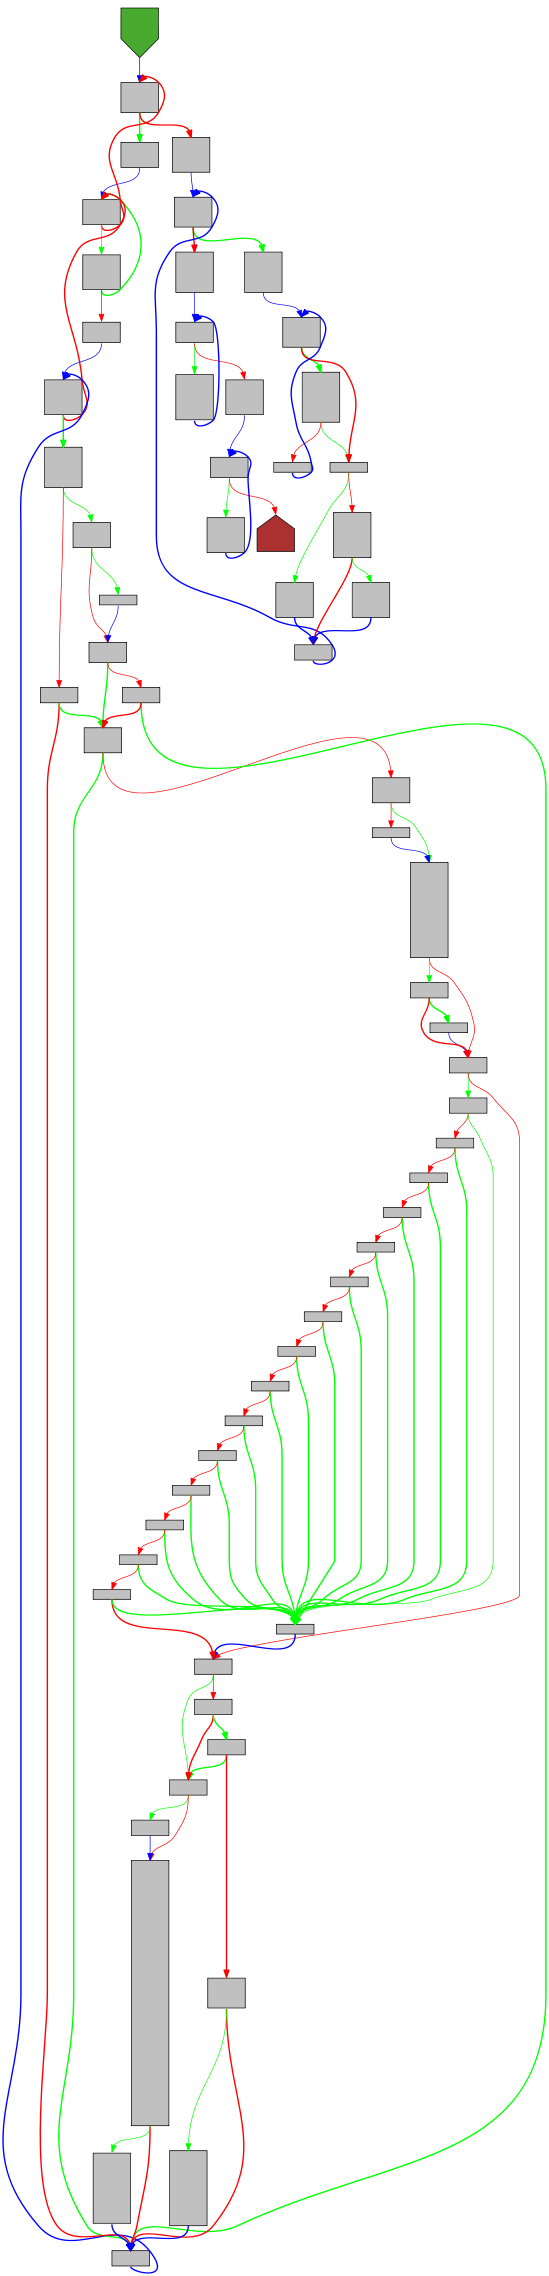 Control flow graph of typeFields